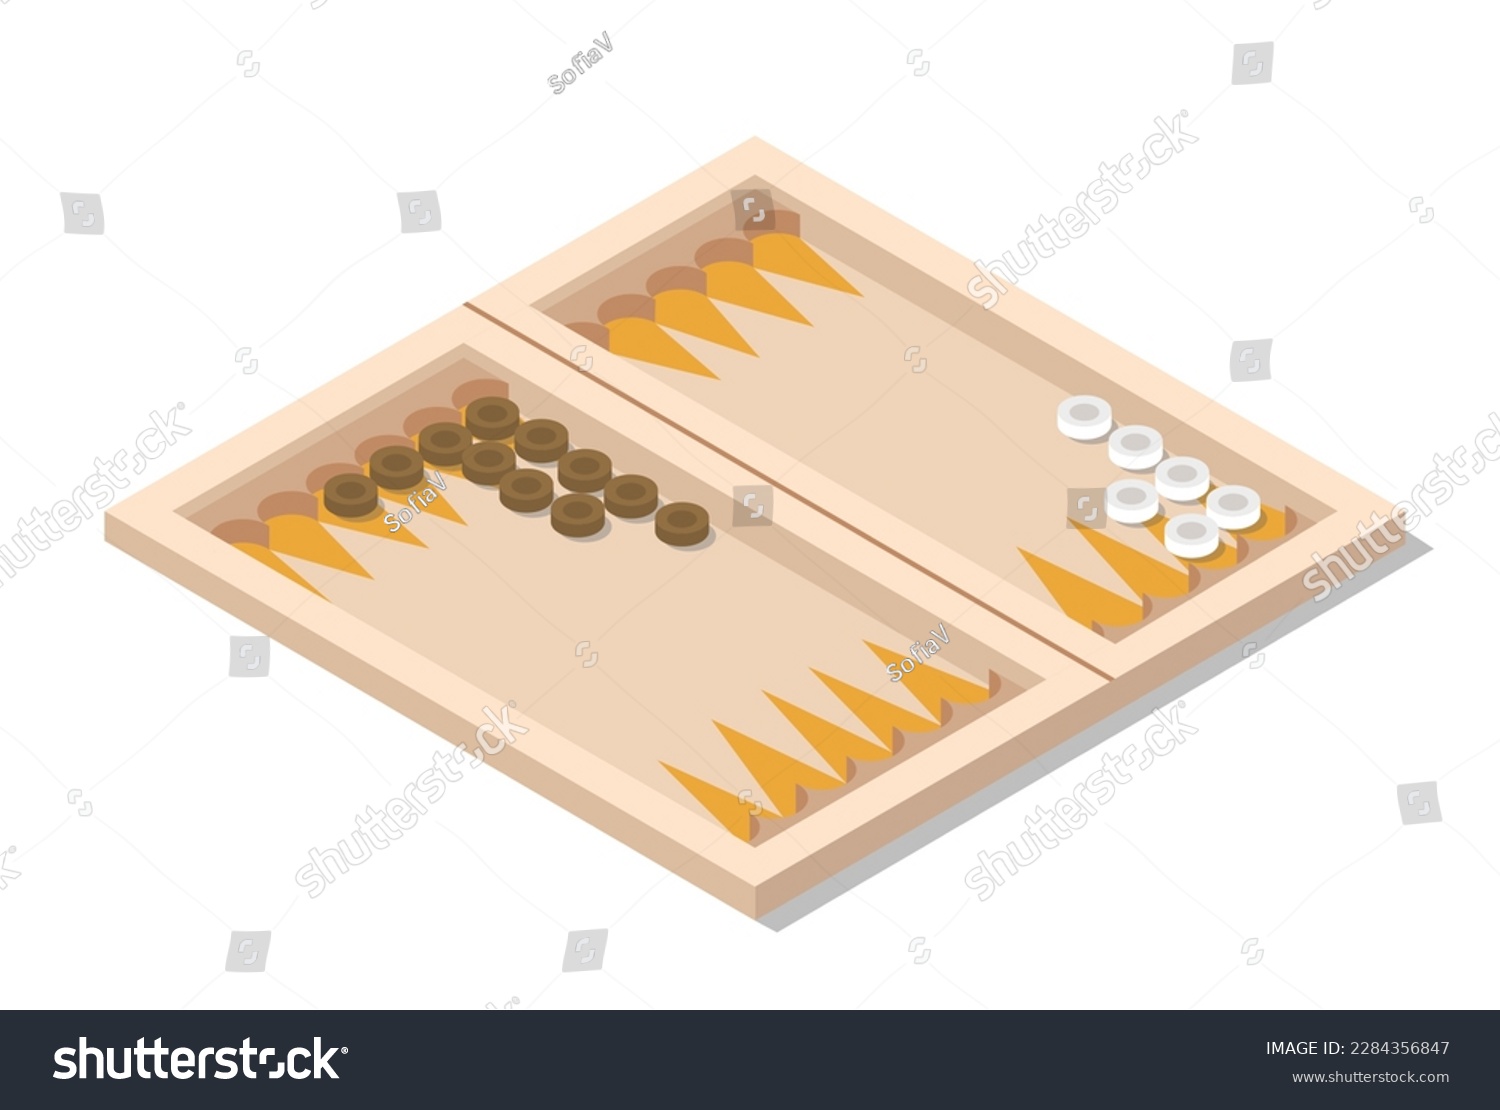 SVG of backgammon playing surface and pieces, isolated board game for fun and recreation. Isolated tabletop field with dice, entertainment and recreation, pastime and leisure hobby. Vector in flat style svg